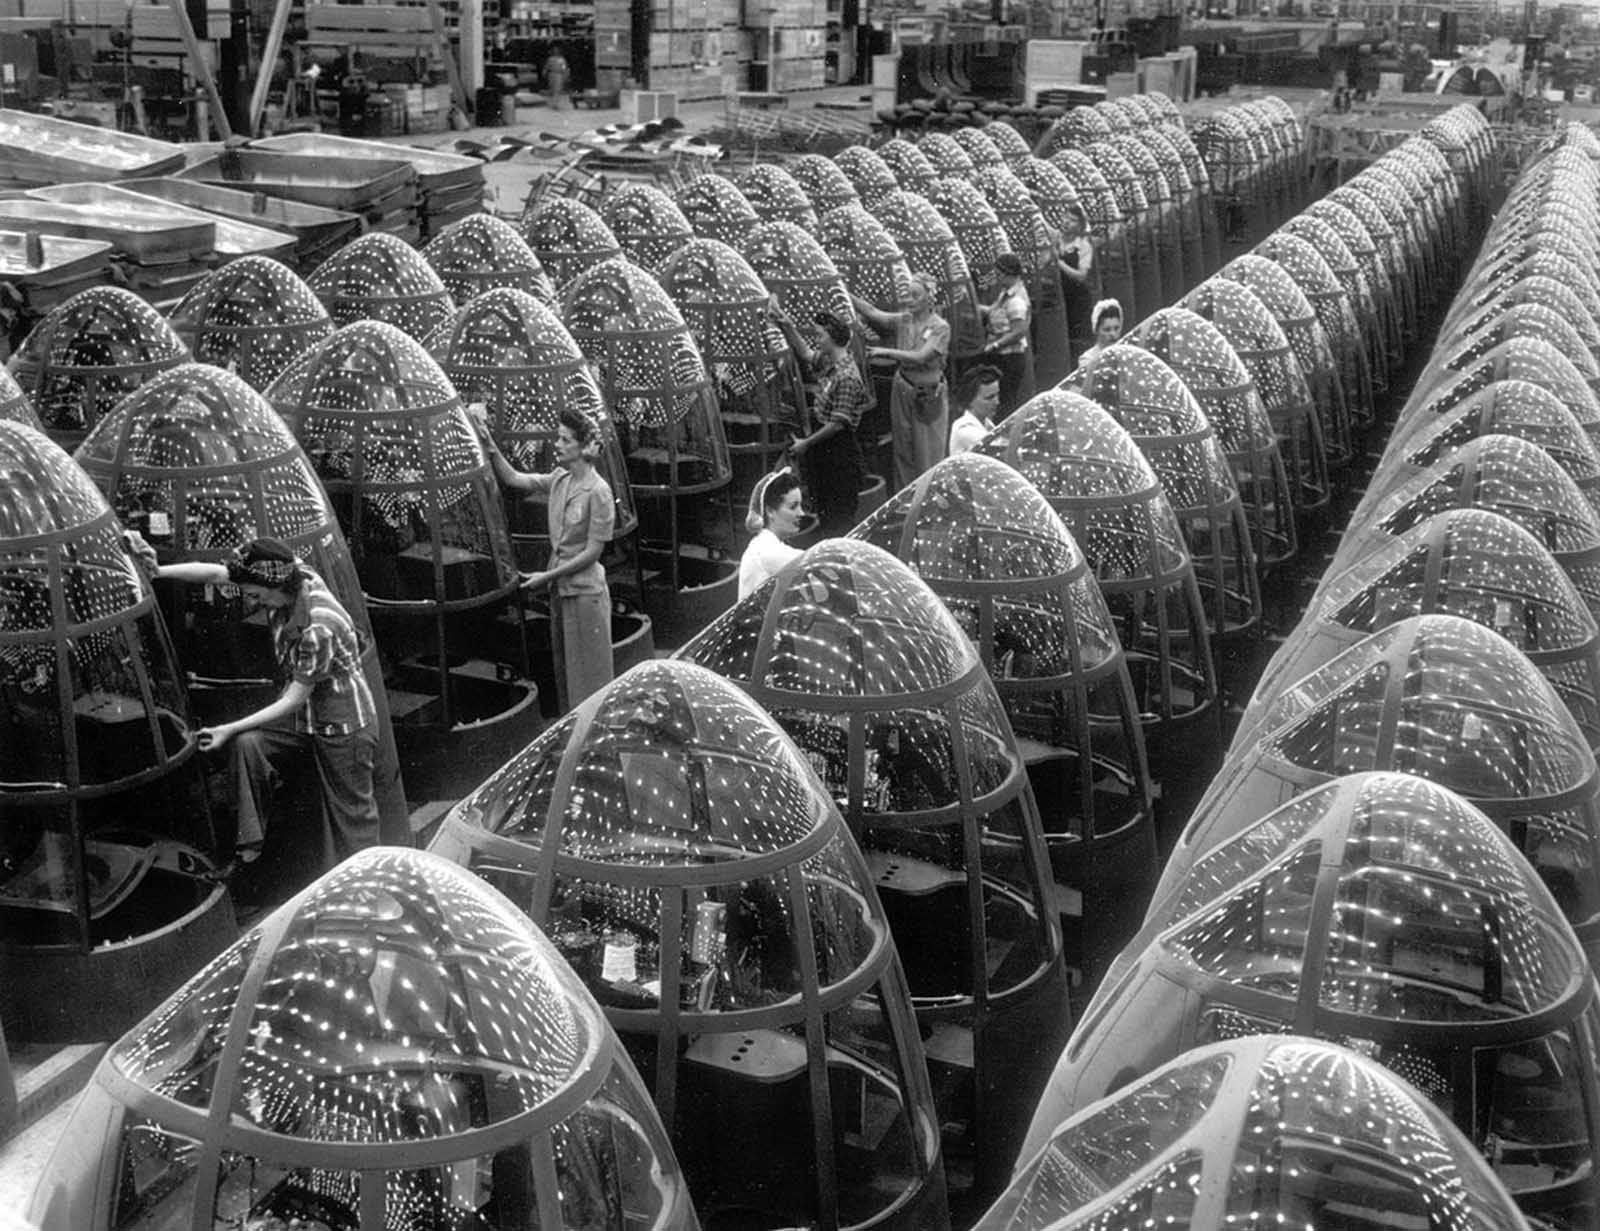 Women workers groom lines of transparent noses for the A-20J attack bombers at Douglas Aircraft's in Long Beach, California, in October of 1942.